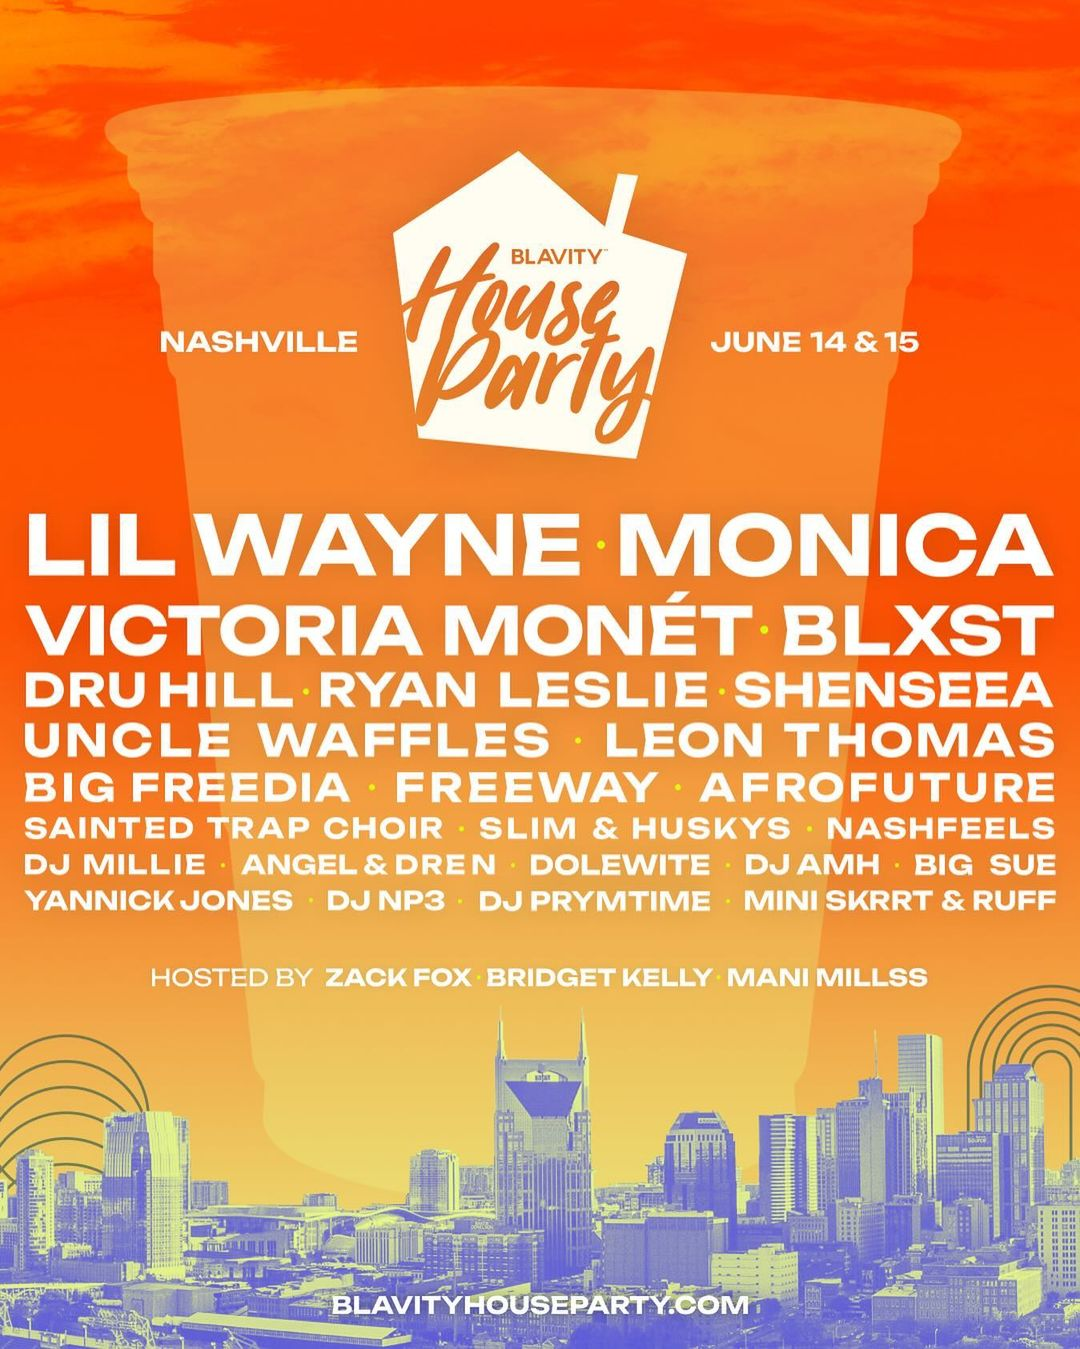 Coming to Nashville: Blavity House Party, an Innovative, Community-Focused New Music Festival